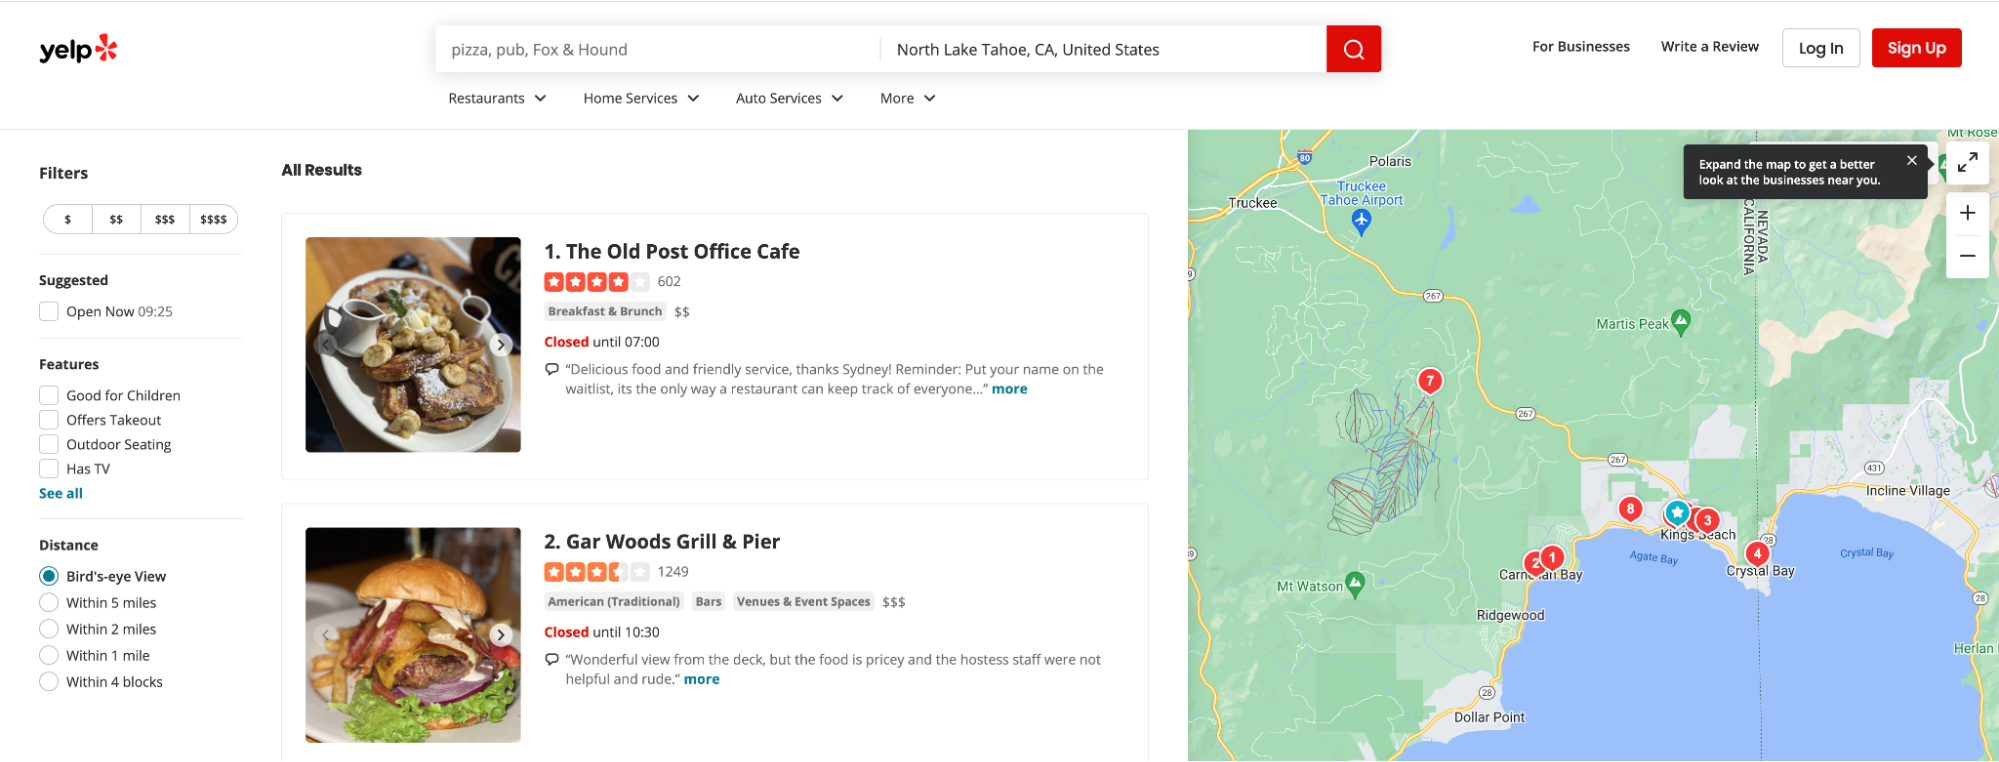 Yelp search results for businesses in North Lake Tahoe.